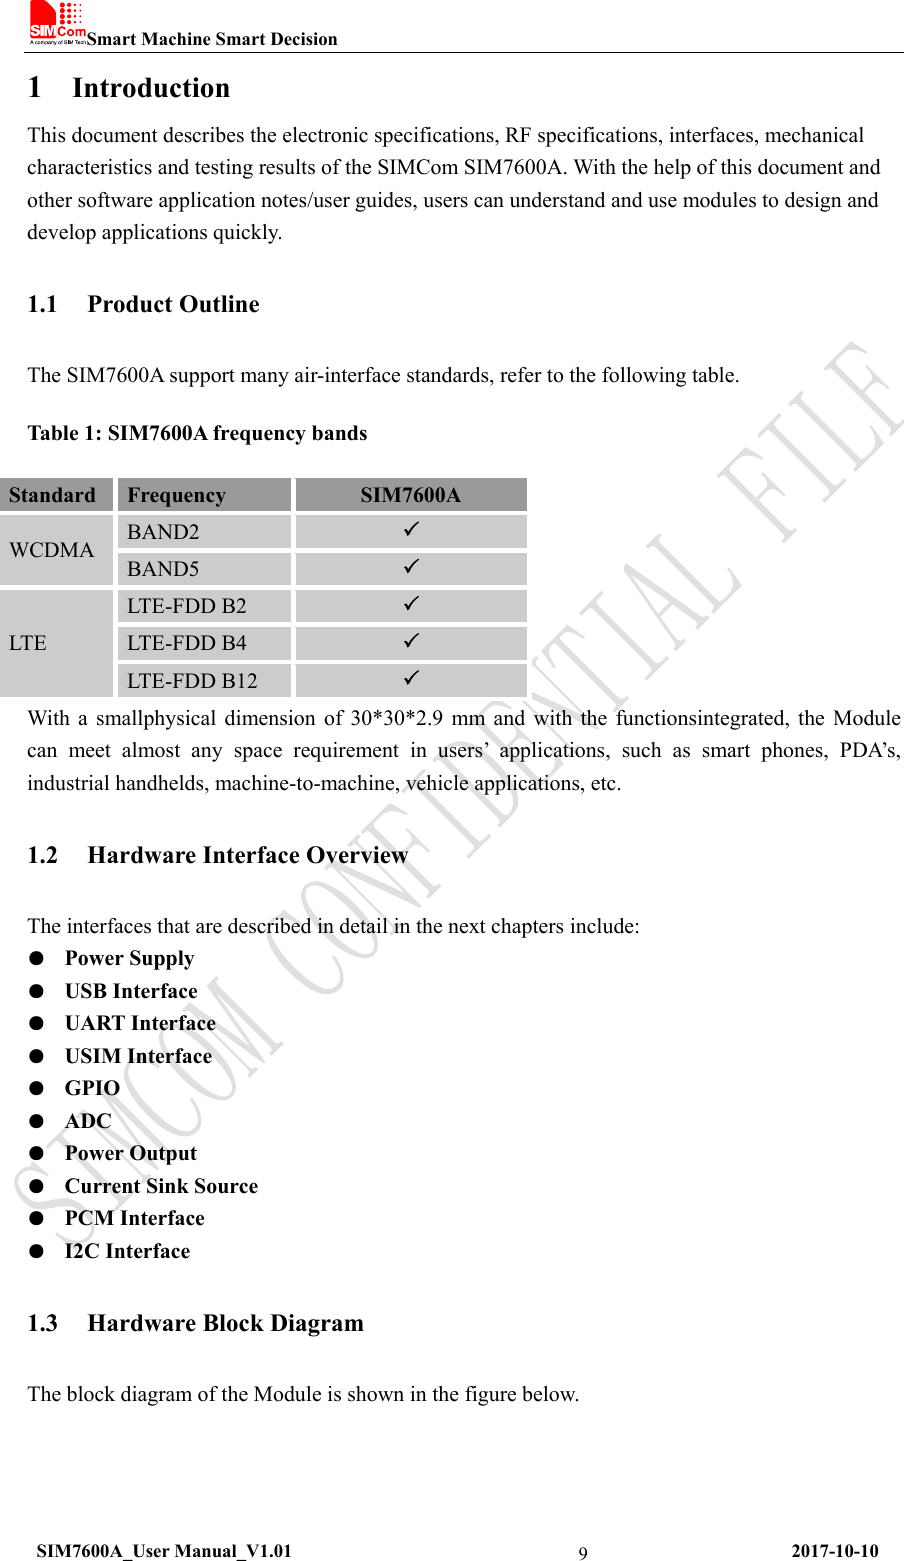 Smart Machine Smart Decision  SIM7600A_User Manual_V1.01                                                     2017-10-10 91 Introduction This document describes the electronic specifications, RF specifications, interfaces, mechanical characteristics and testing results of the SIMCom SIM7600A. With the help of this document and other software application notes/user guides, users can understand and use modules to design and develop applications quickly. 1.1 Product Outline The SIM7600A support many air-interface standards, refer to the following table. Table 1: SIM7600A frequency bands Standard  Frequency  SIM7600A WCDMA  BAND2   BAND5   LTE LTE-FDD B2   LTE-FDD B4   LTE-FDD B12   With a smallphysical dimension of 30*30*2.9 mm and with the functionsintegrated, the Module can meet almost any space requirement in users’ applications, such as smart phones, PDA’s, industrial handhelds, machine-to-machine, vehicle applications, etc. 1.2 Hardware Interface Overview The interfaces that are described in detail in the next chapters include: ●  Power Supply ●  USB Interface ●  UART Interface ●  USIM Interface ●  GPIO ●  ADC ●  Power Output ●  Current Sink Source ●  PCM Interface ●  I2C Interface 1.3 Hardware Block Diagram The block diagram of the Module is shown in the figure below. 